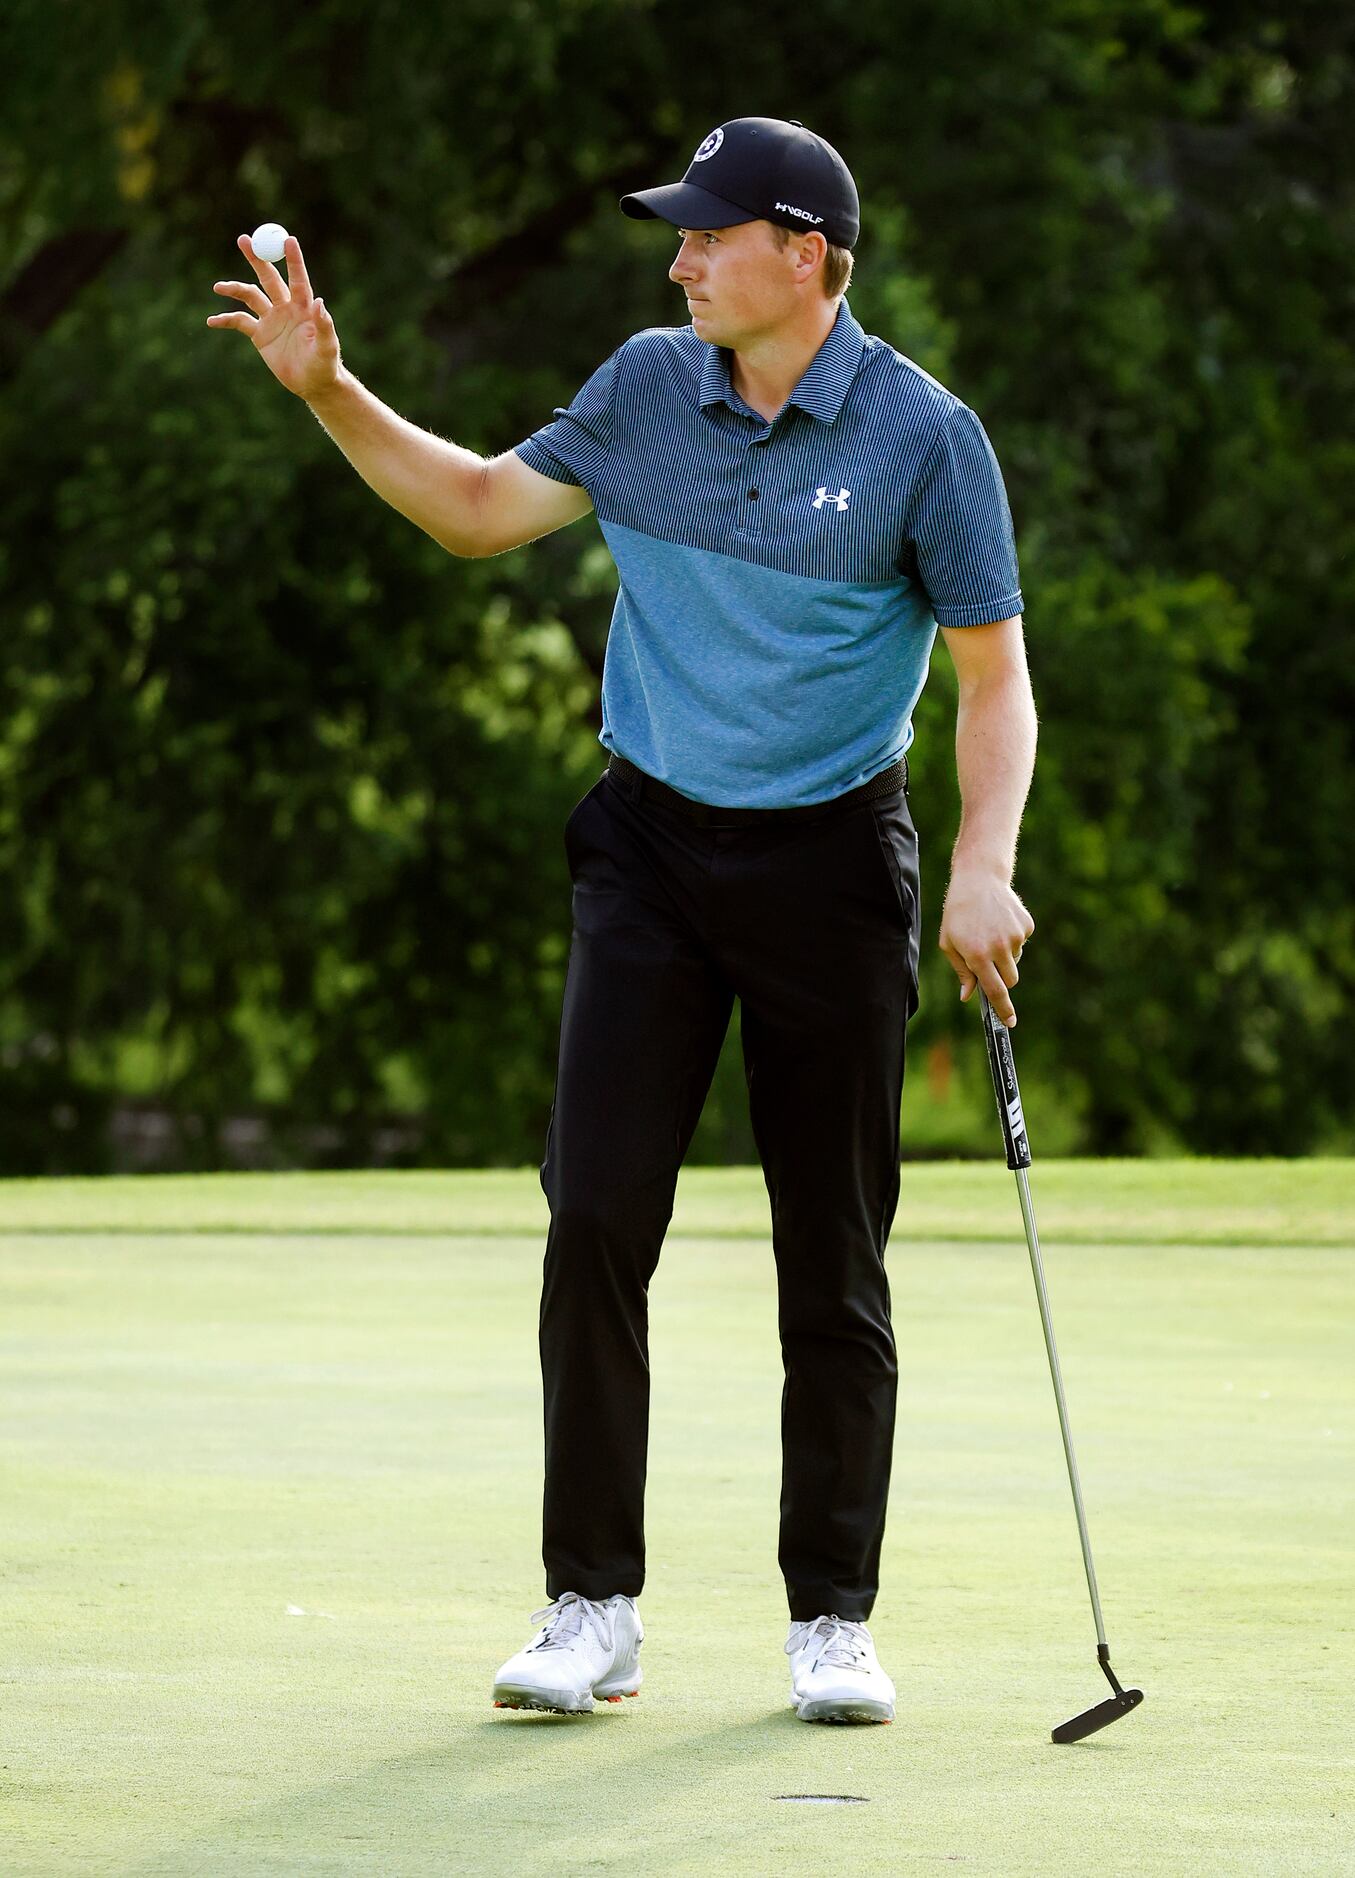 Professional golfer Jordan Spieth acknowledges fans' cheers after making a birdie on No. 18...